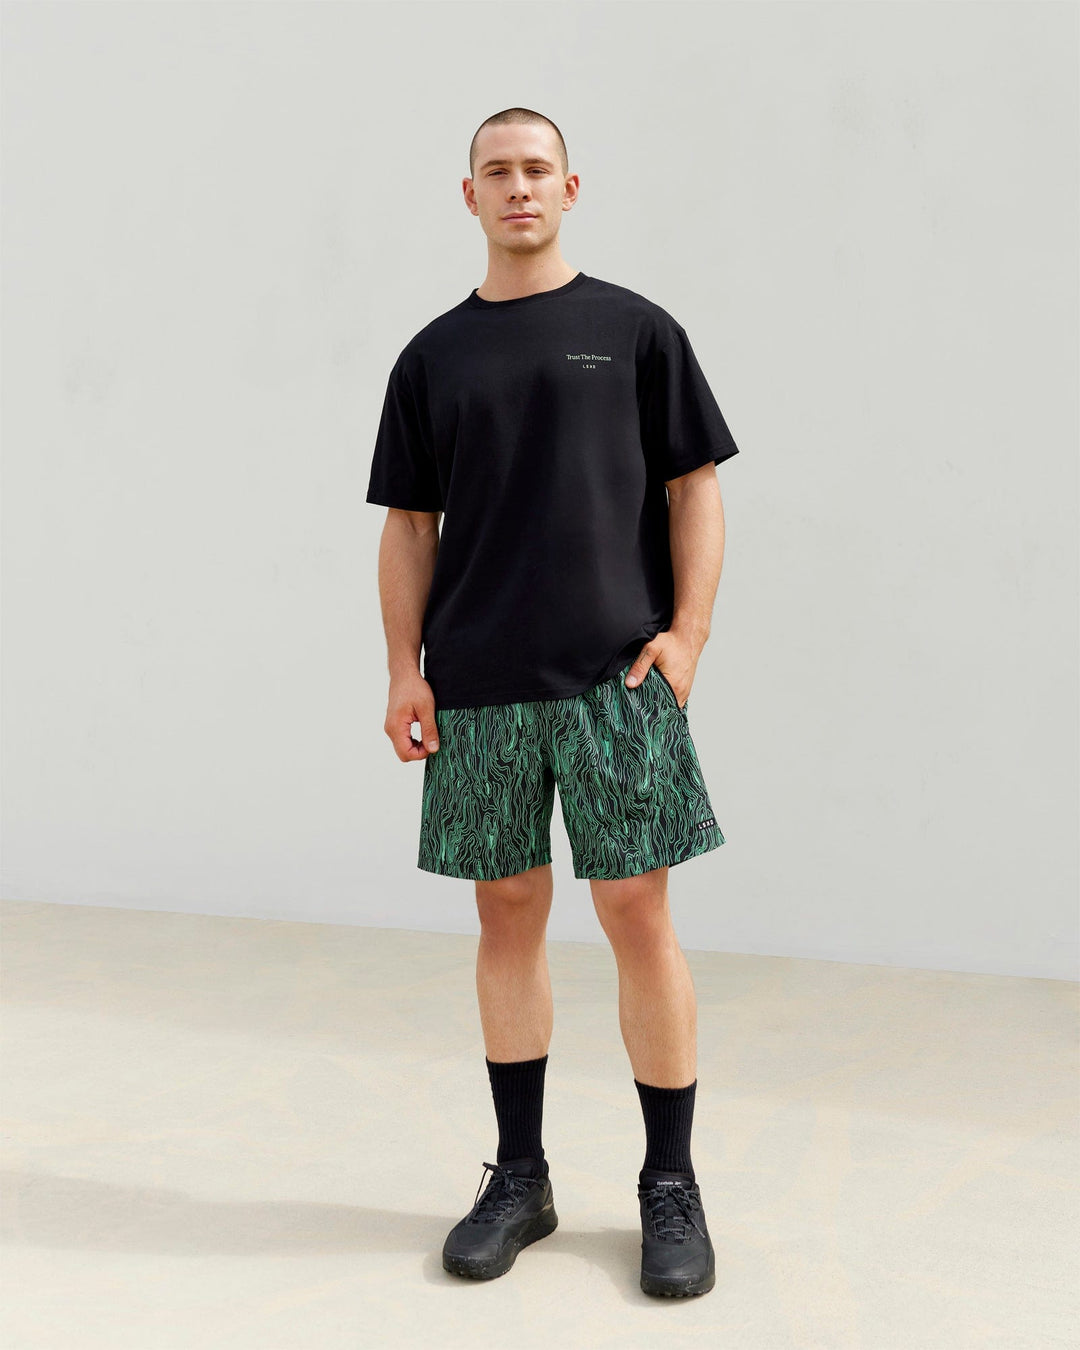 Rep 7'' Performance Shorts - Topographic Black-Lime